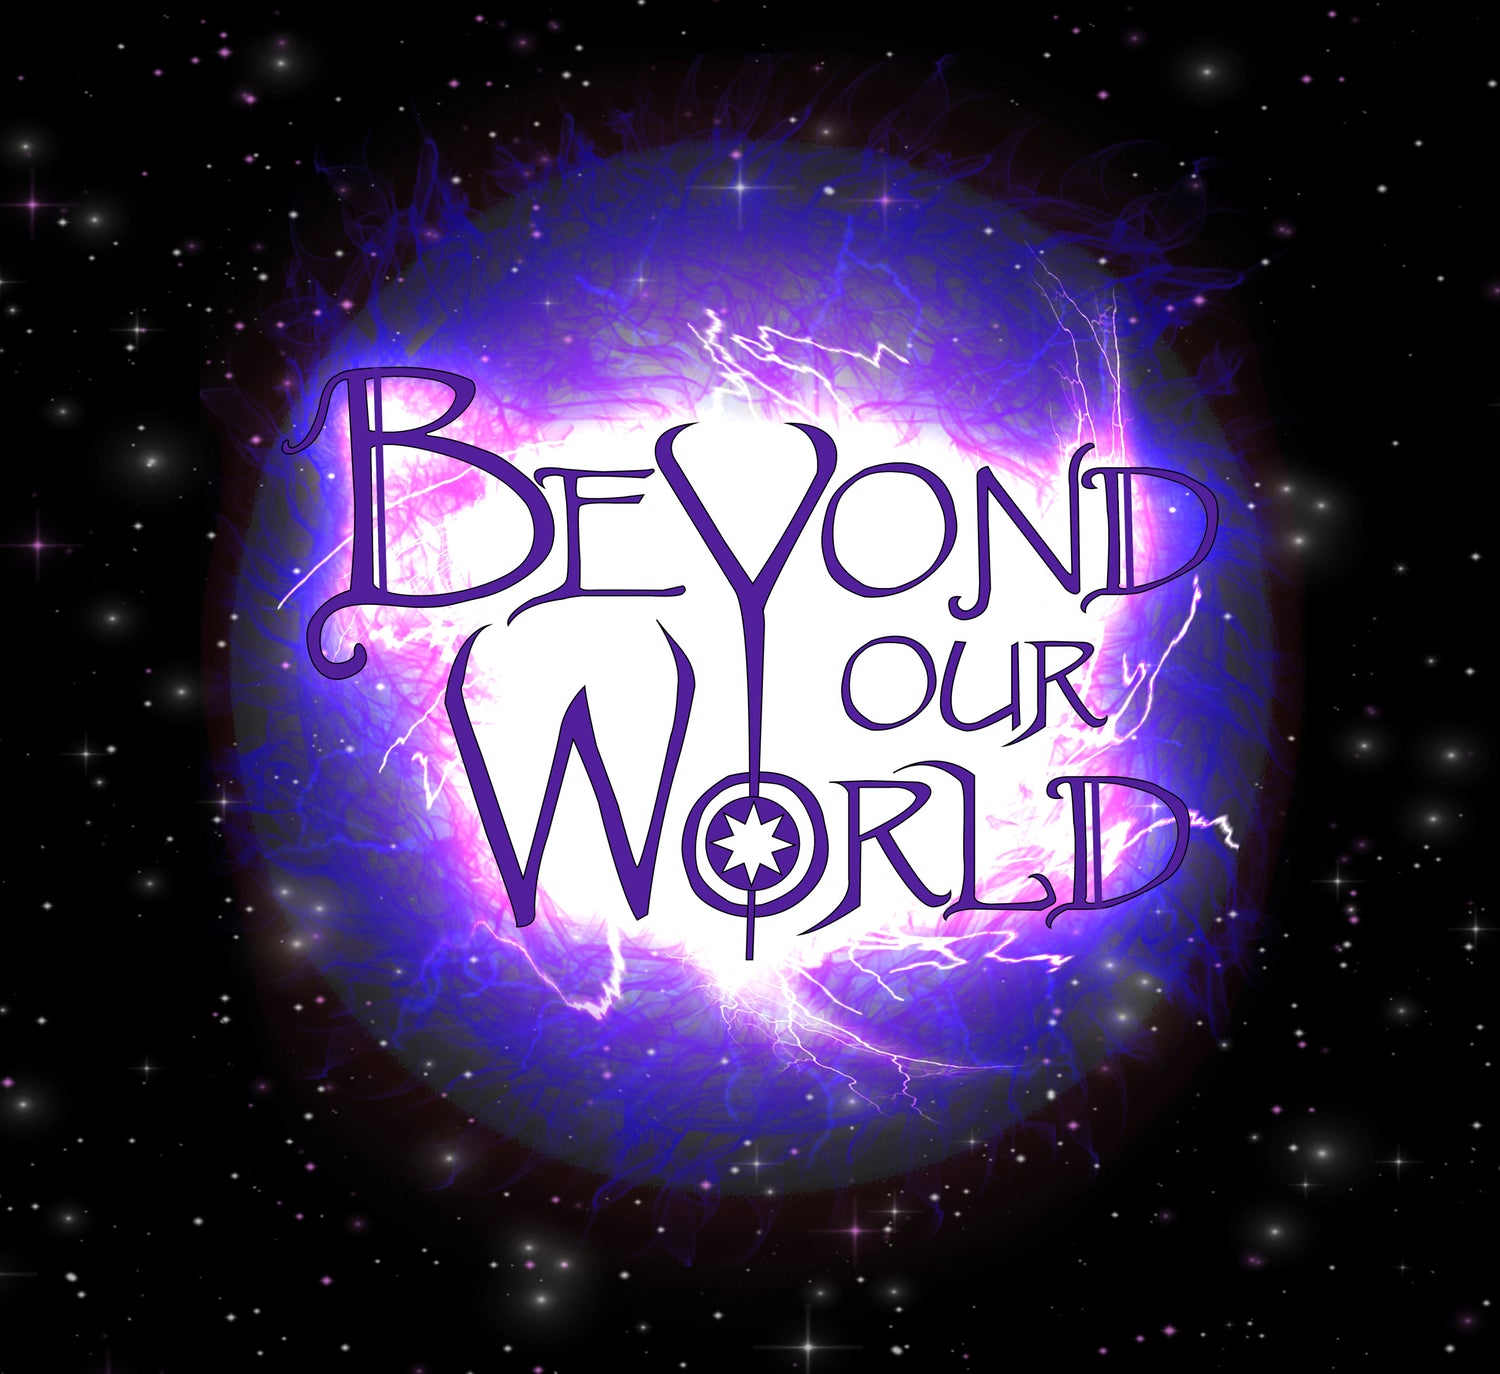 BEYOND OUR WORLD Brand